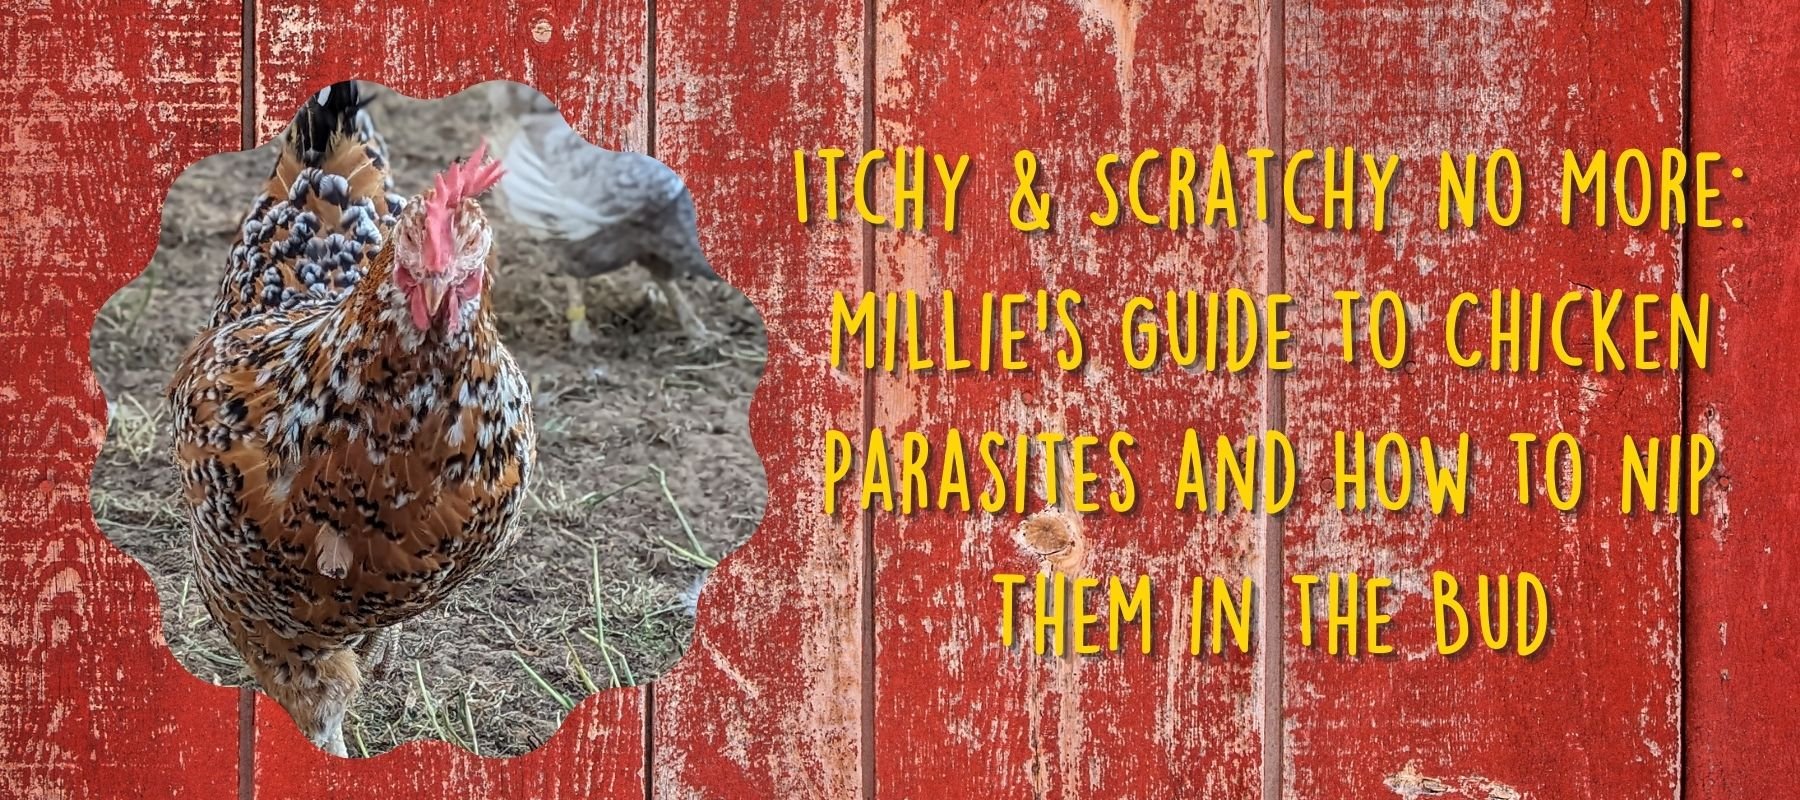 Itchy & Scratchy No More: Millie's Guide to Chicken Parasites and How to Nip Them in the Bud - Cluck It All Farms